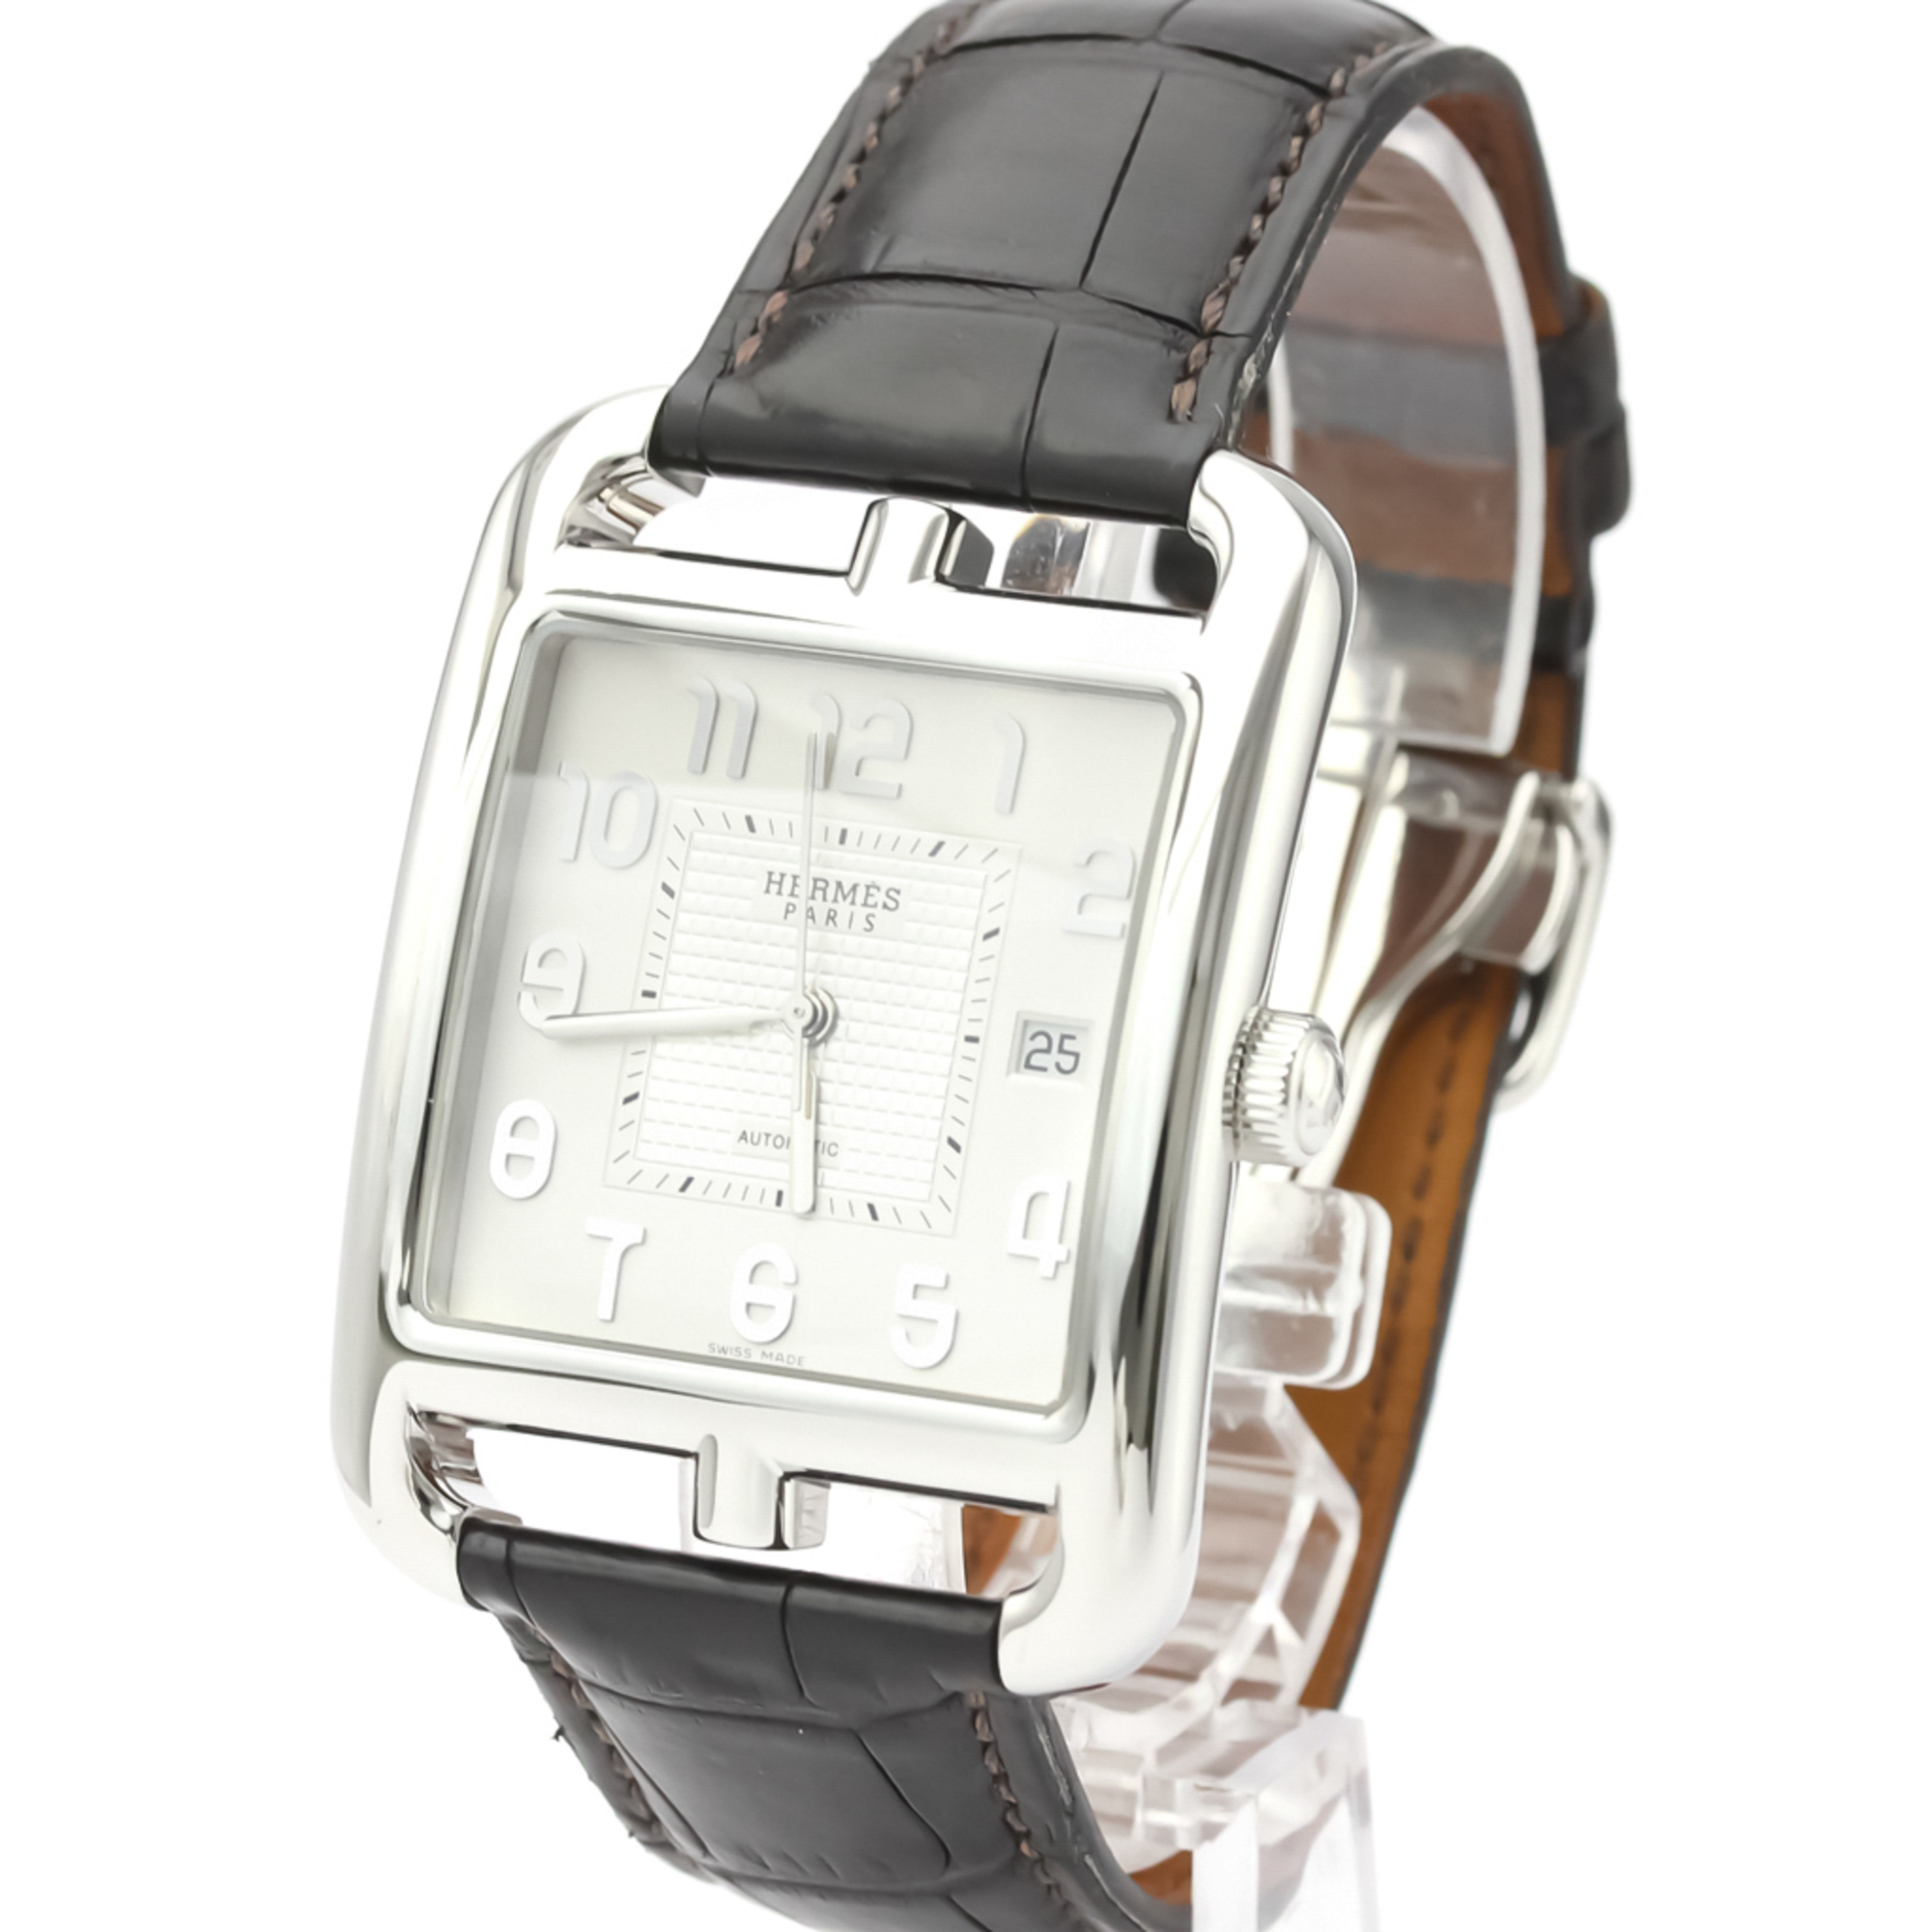 Hermes Cape Cod Automatic Stainless Steel Men's Dress Watch CD6.710